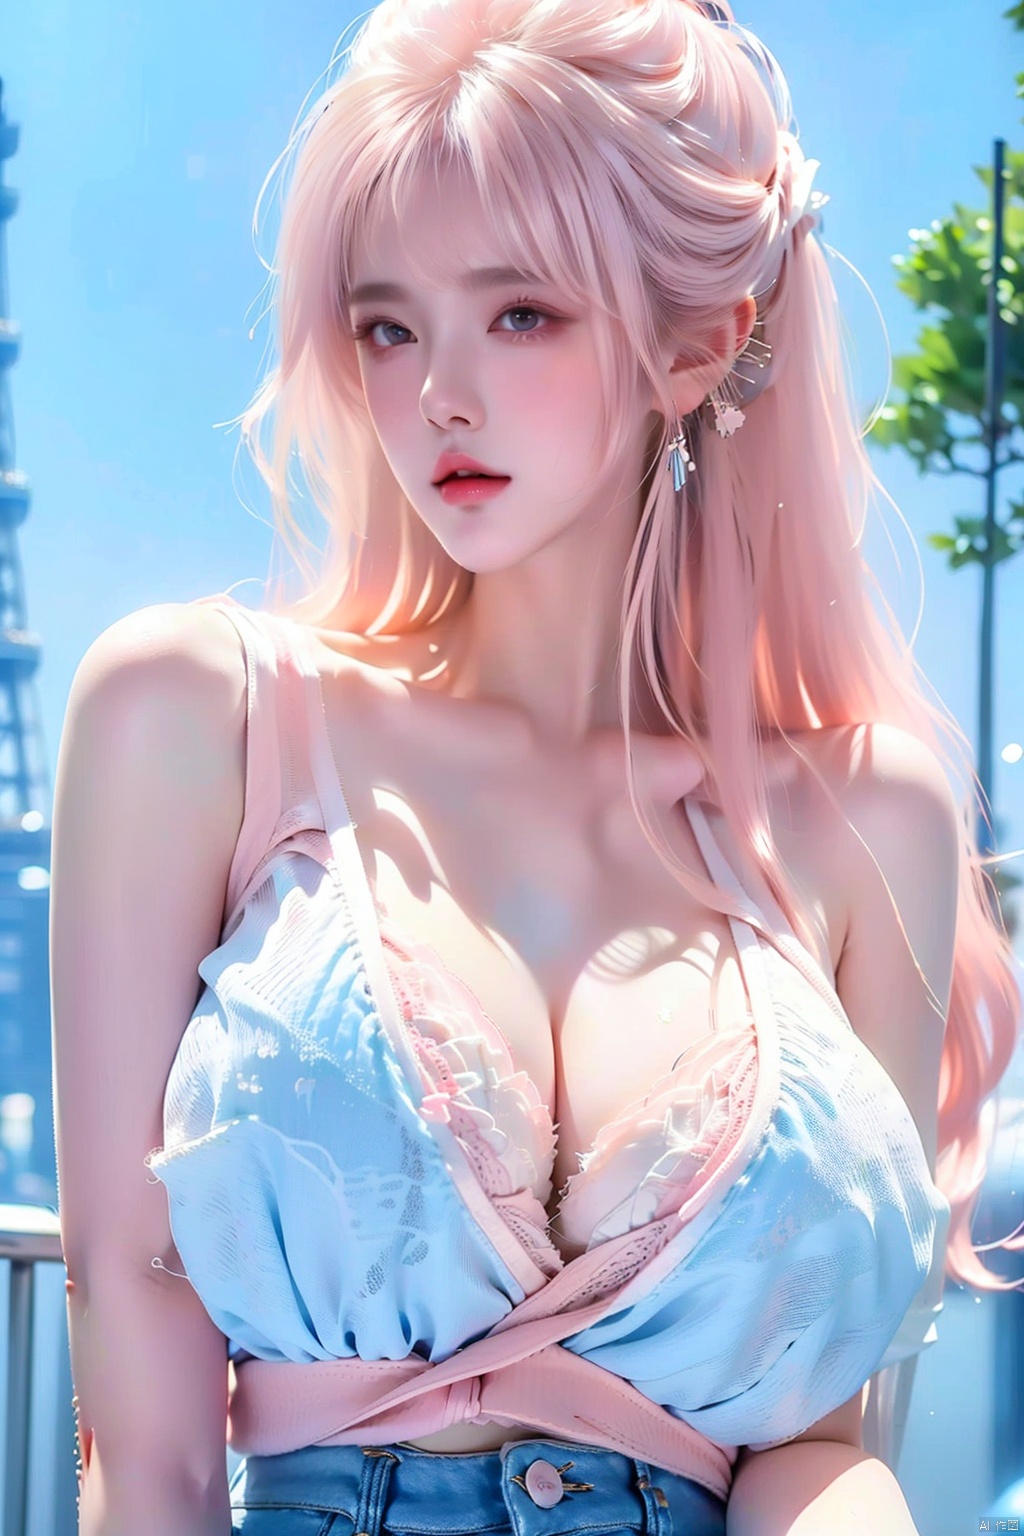 1 girl, (8k, original photo, best quality, Masterpiece: 1.3), (realistic, realistic: 1.37), (daytime), (Looking at the audience: 1.331), Posing, (Tokyo Tower:1.4), ((Daytime City View)), (Real city),((Clear background)), soft light, 1 girl, extremely beautiful face, ((Perfect lively breasts)), (Big boobs:1.5),(Bare cleavage:1.2), put down hands, random hairstyle, (Long light pink hair:1.5), random expression, big eyes, small belly,((((White short **** top)))), ((((Light blue denim short shorts)))), mix4, an extremely delicate and beautiful girl, beautiful face,beautiful eyes, beautiful girl, 8k wallpaper, (best quality: 1.12), (Detailed: 1.12), (Complex: 1.12), (Ultra Detailed: 1.12), (Advanced: 1.12), Ultra Detailed, Ultra Detailed, High Resolution Illustration, Color, 8k wallpaper, highres, Movie Light, Ray Tracing, (8k, Original photo, best Quality, Masterpiece, Ultra High, Ultra Detailed: 1.2), ((realistic, photo-realistic)),yuzu,(large breasts),(breast expansion), (cleavage),